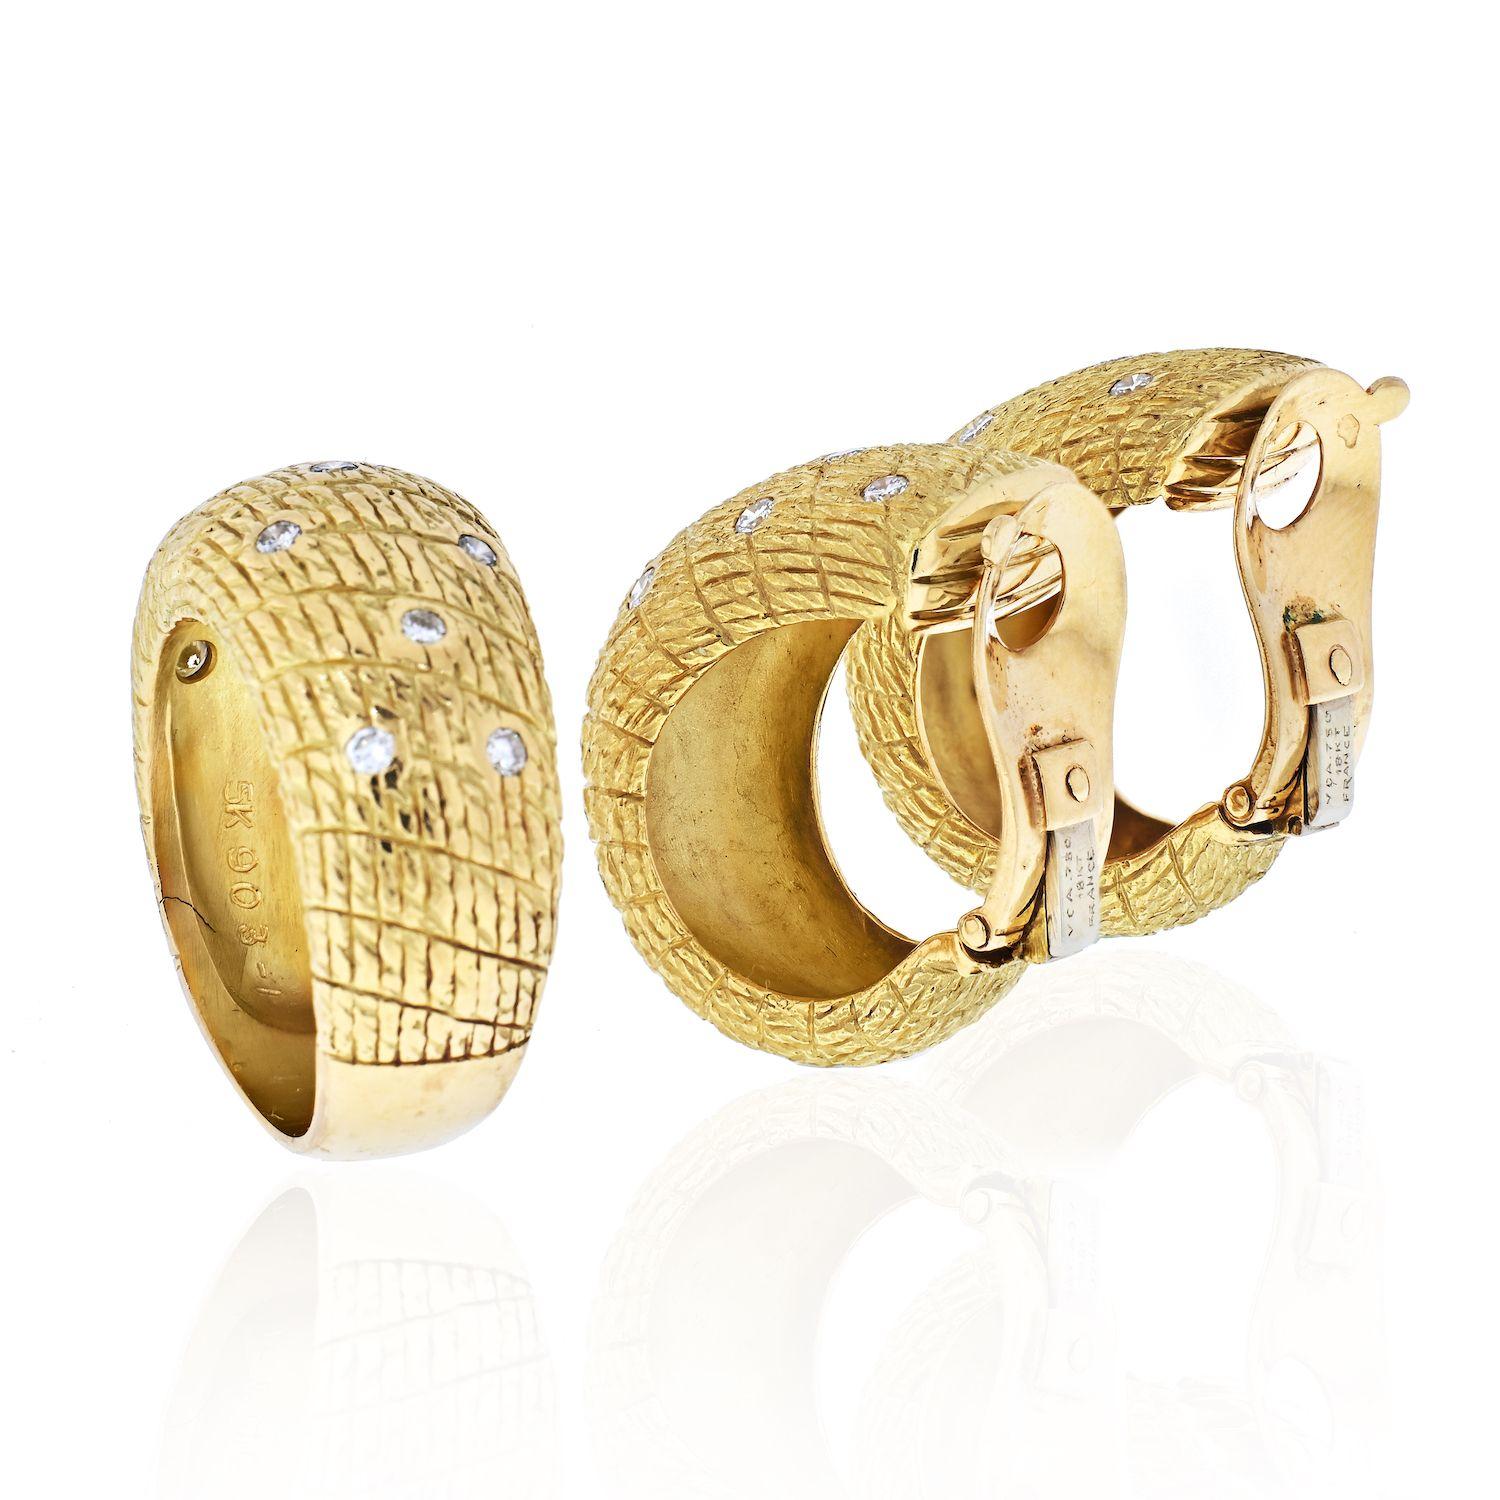 Modern Van Cleef & Arpels 18k Yellow Gold1970's Diamond Earrings and a Ring Jewelry Set For Sale